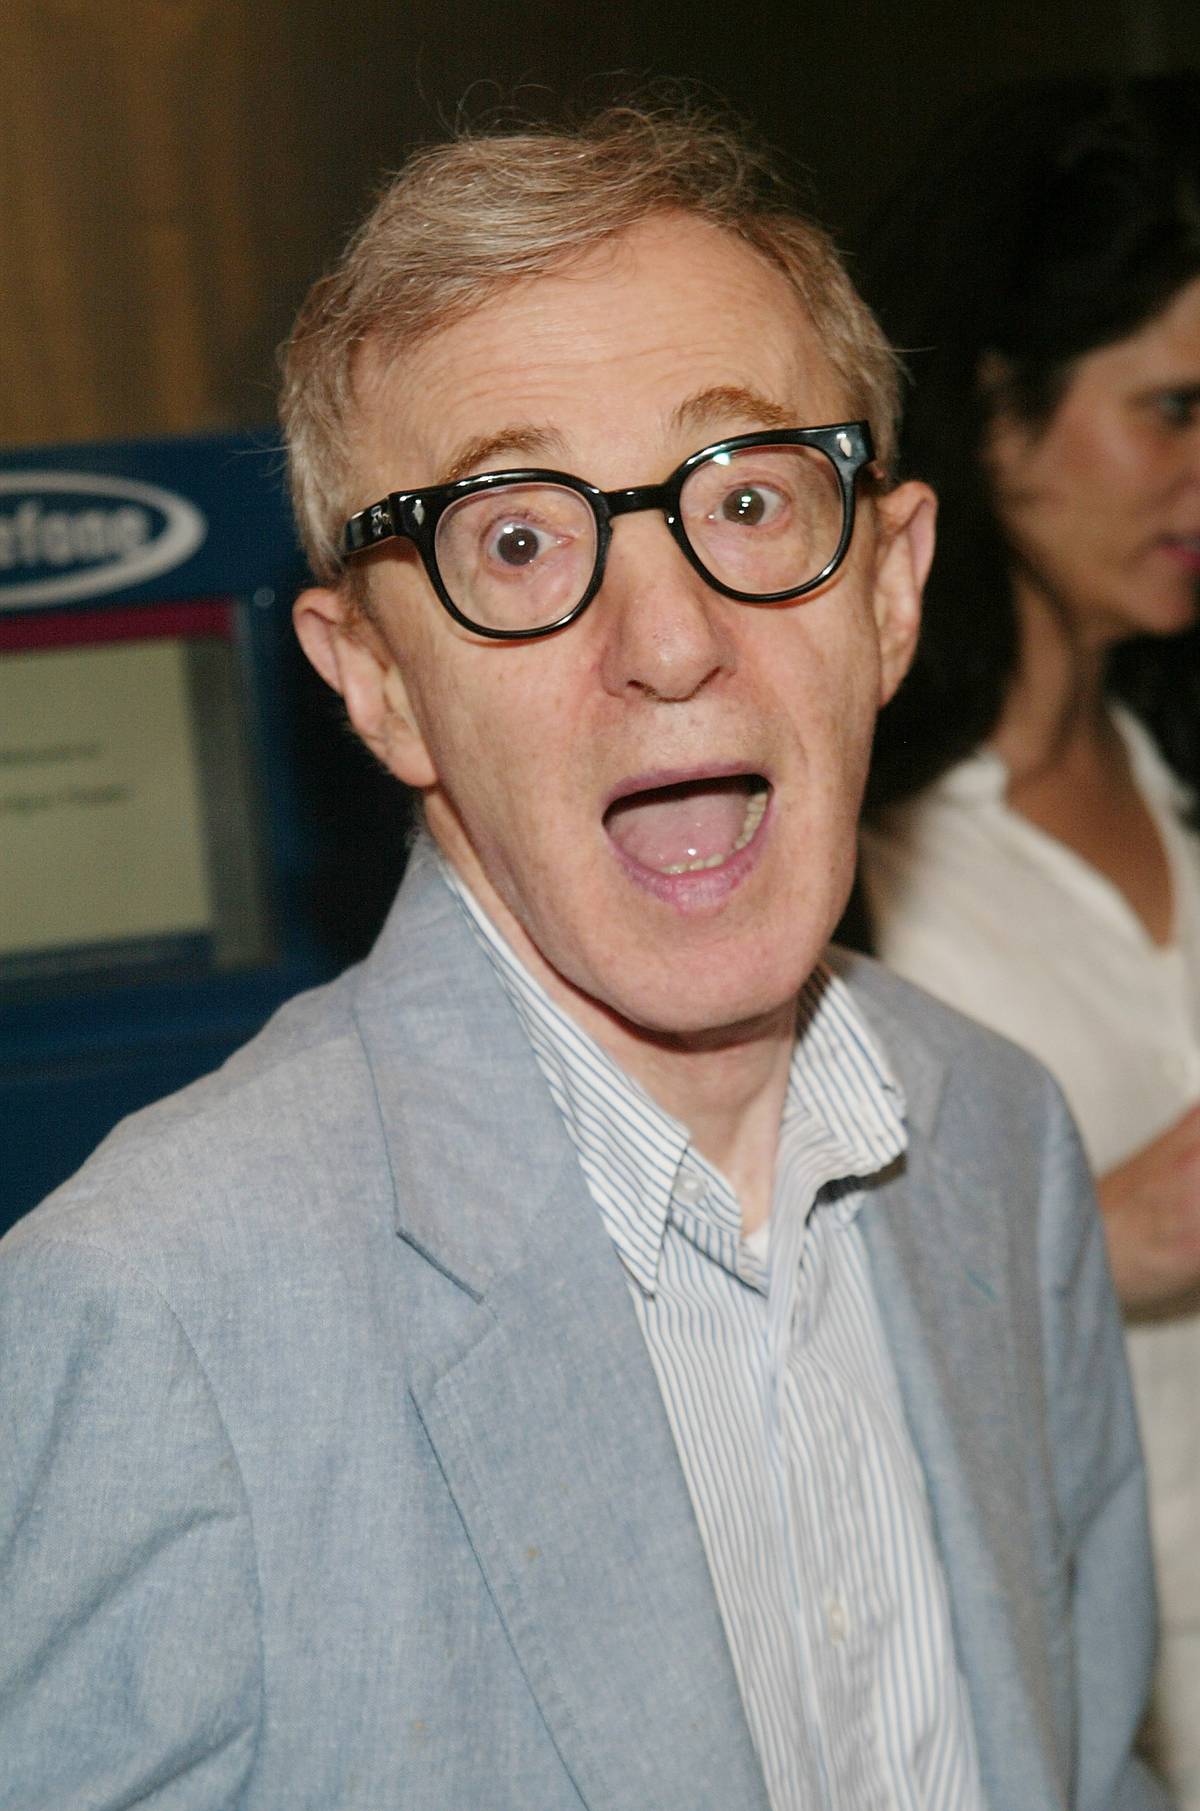 Filmmaker Woody Allen attends a special screening of DreamWorks Pictures’ “Anything Else” at the Paris Theater September 16, 2003 in New York City. (Photo by Evan Agostini/Getty Images)